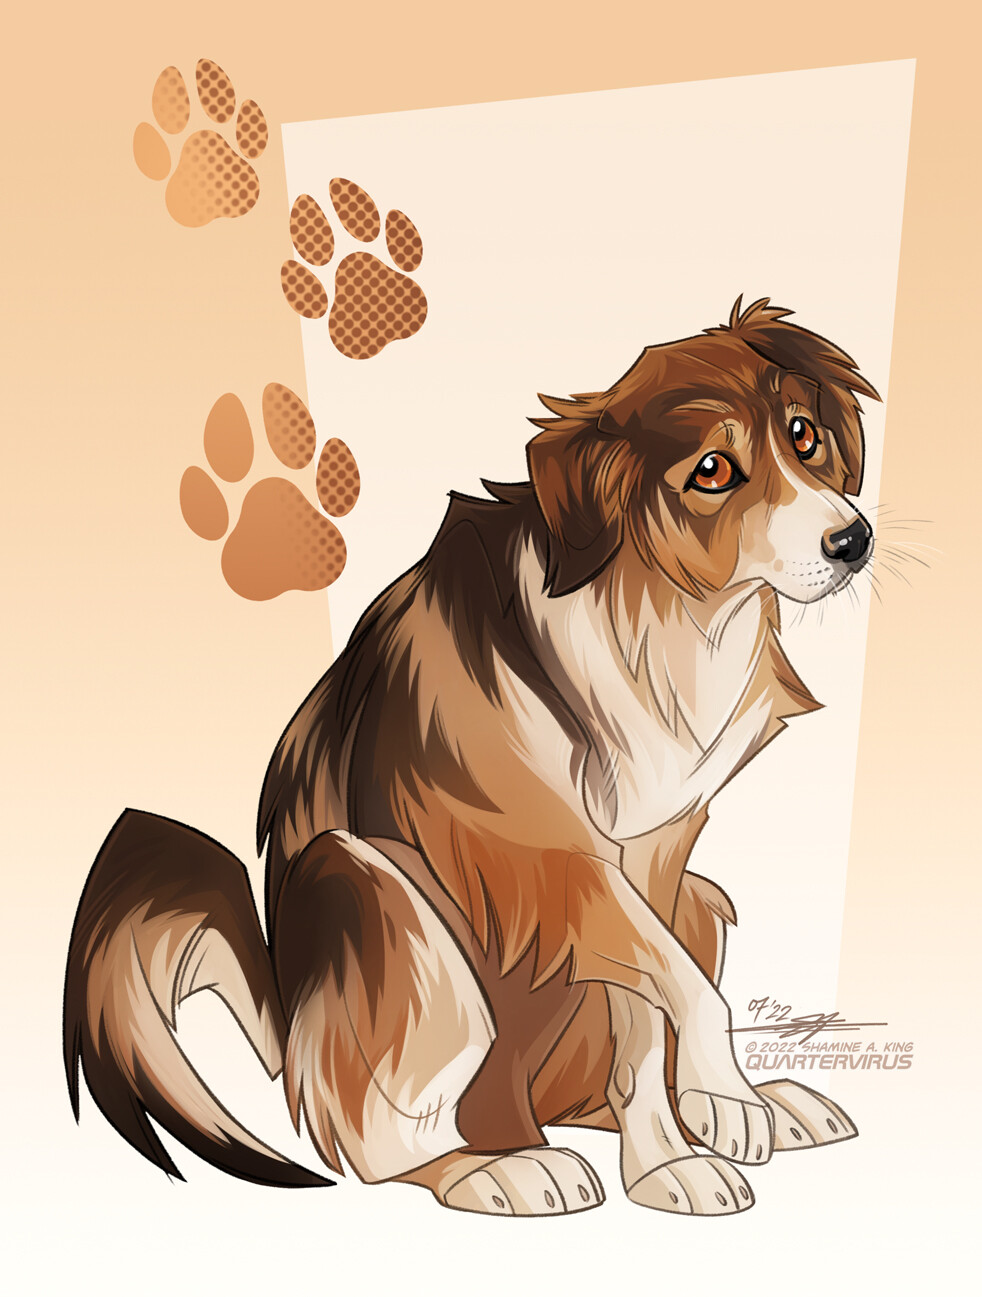 I've been very busy this month with finally moving to my own flat! In between packing, building IKEA furniture, and getting settled, I've been drawing more dogs from Grekisk Gatu Hundar:

https://grekiskagatuhundar.com/